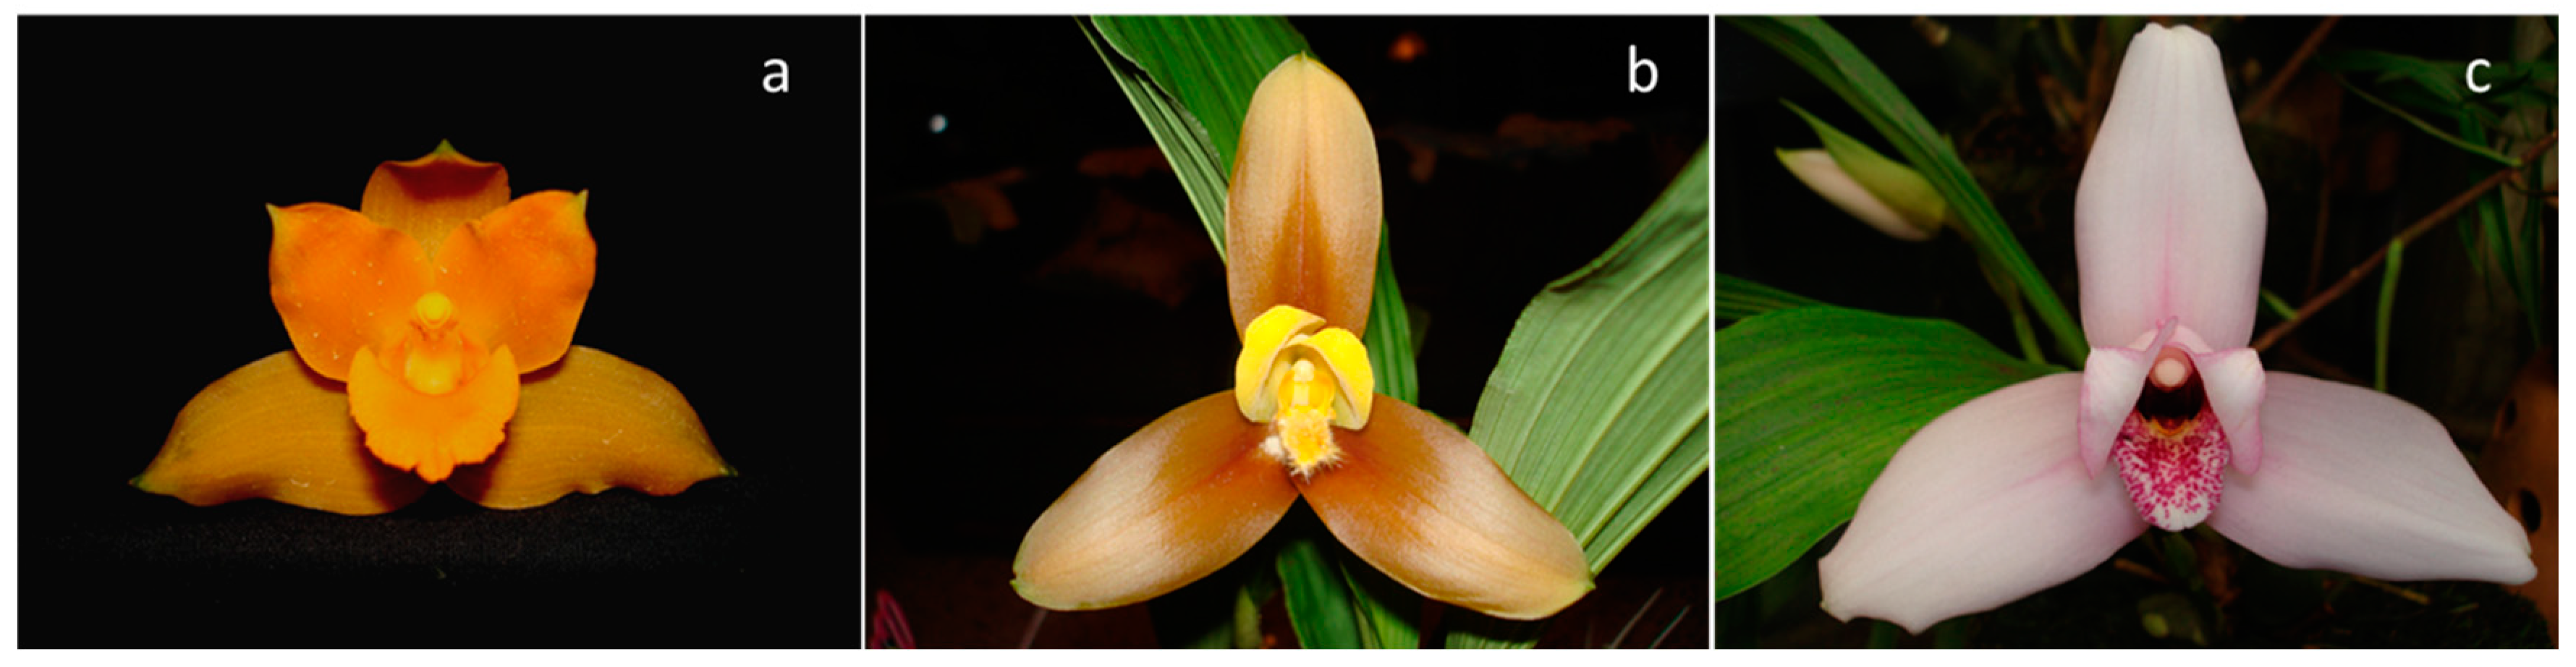 The Physioogy of Tropical Orchids in Relation To The Industry